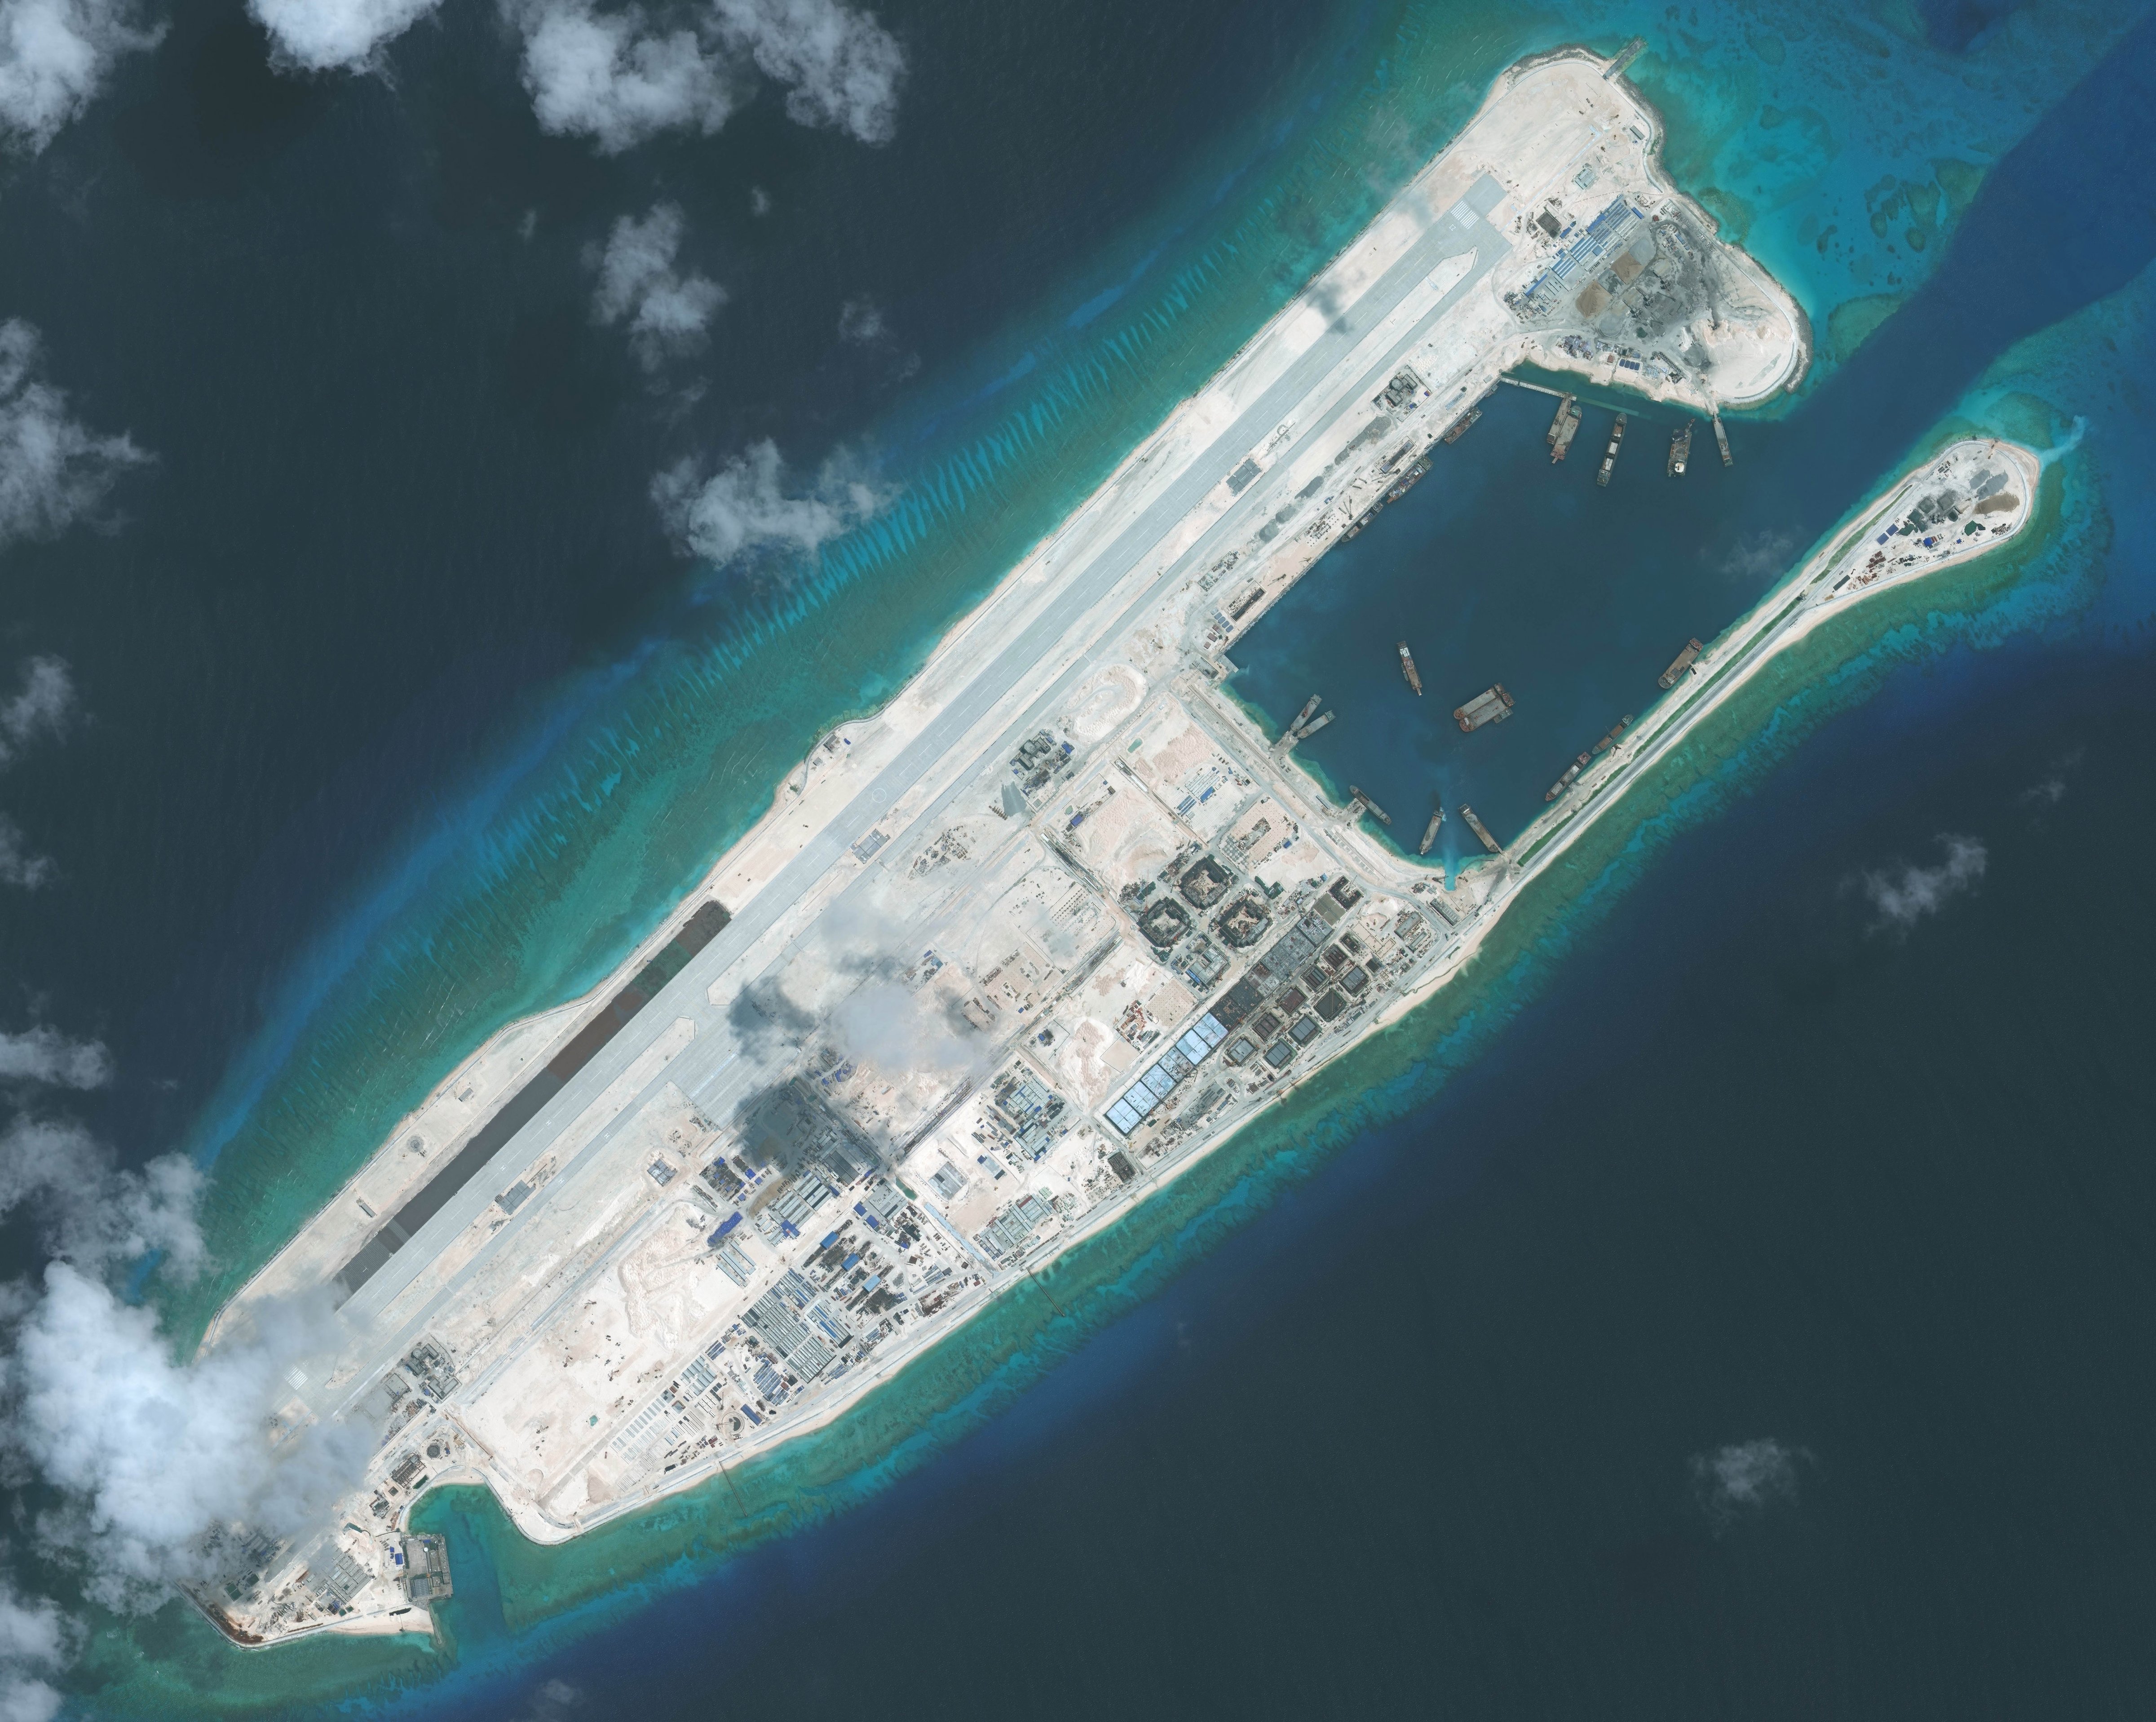 DigitalGlobe imagery of the nearly completed construction within the Fiery Cross Reef located in the South China Sea, Sept. 3, 2015 (ScapeWare/DigitalGlobe/Getty Images)